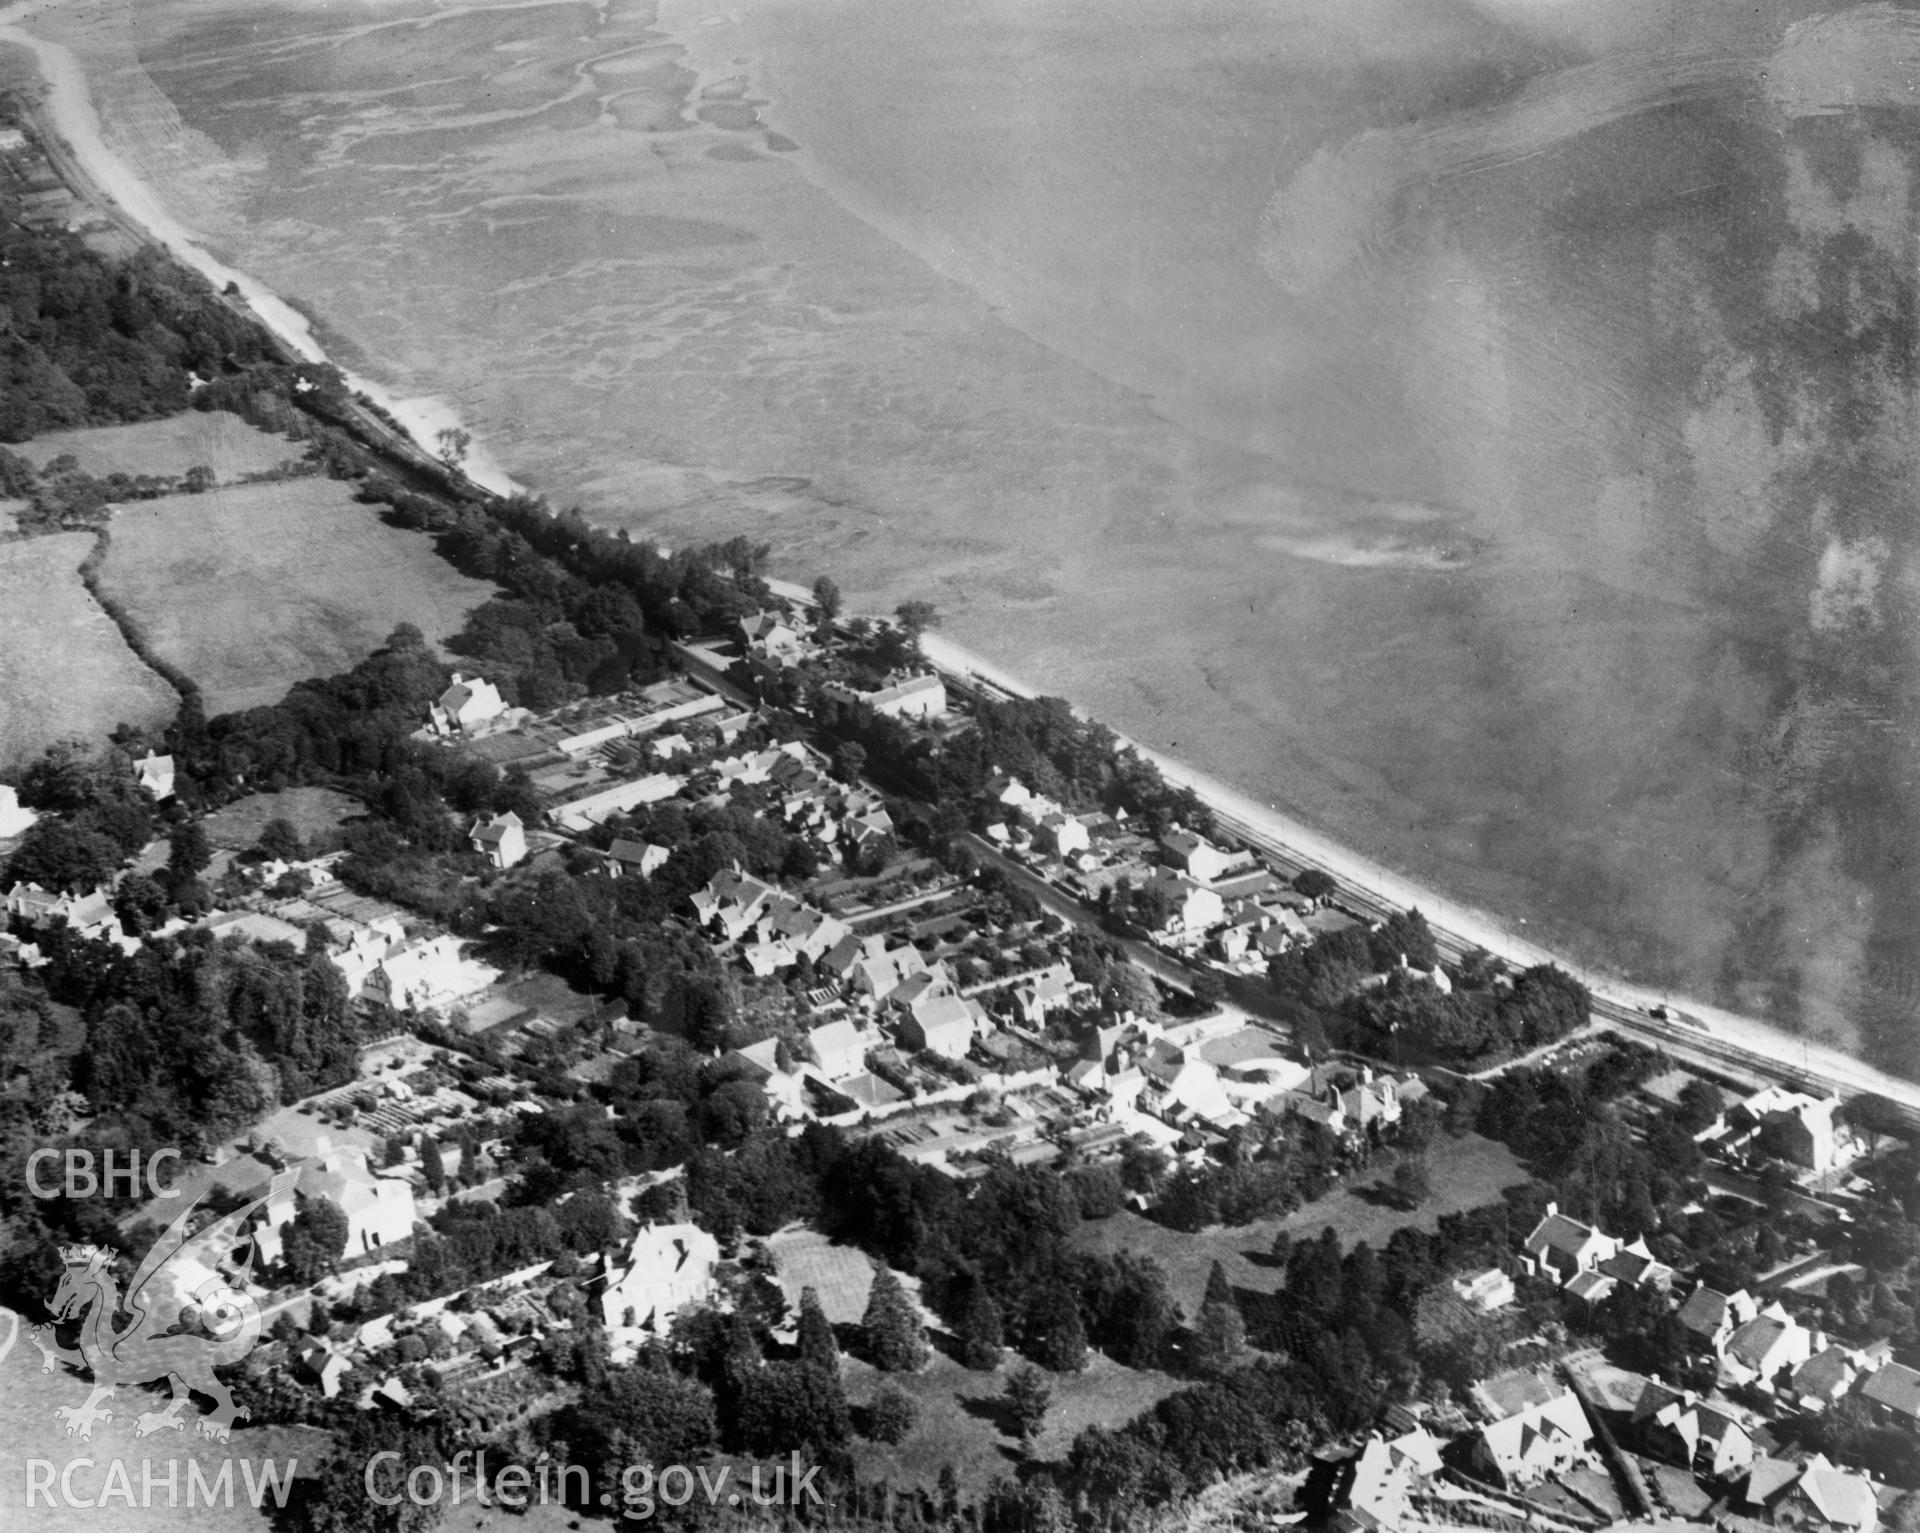 View of Mumbles showing railway. Oblique aerial photograph, 5?x4? BW glass plate.